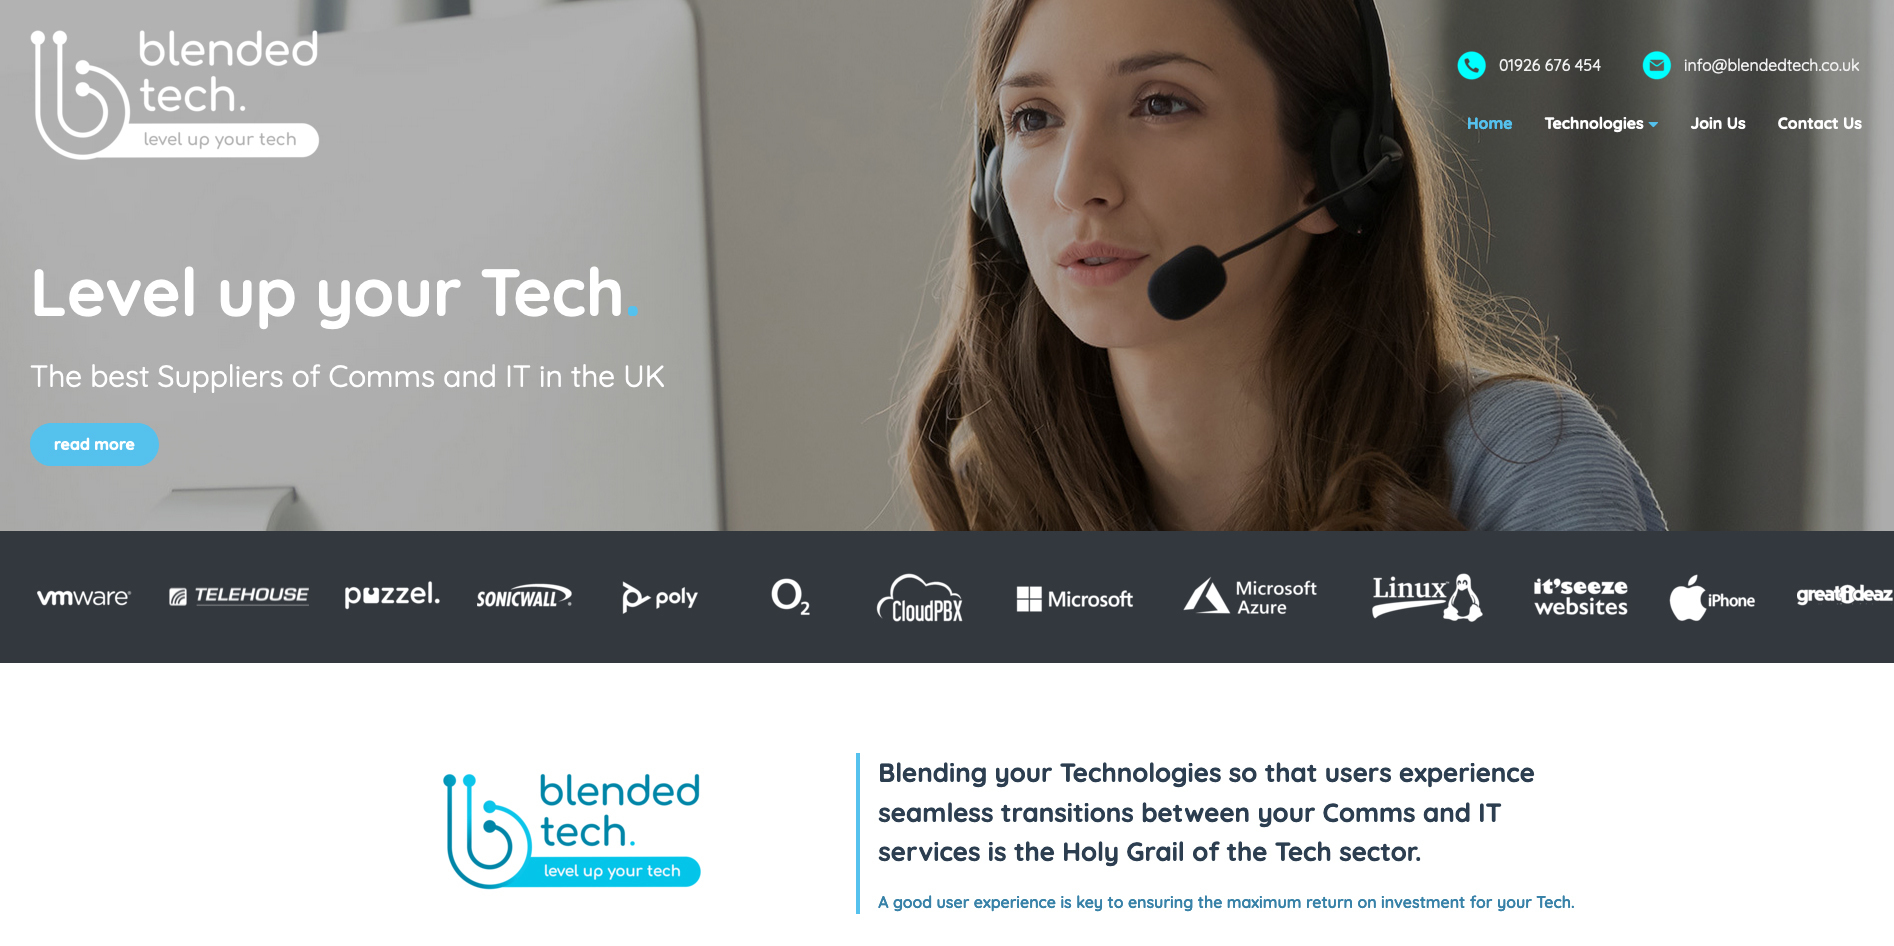 Blended Tech mobile website design by it'seeze